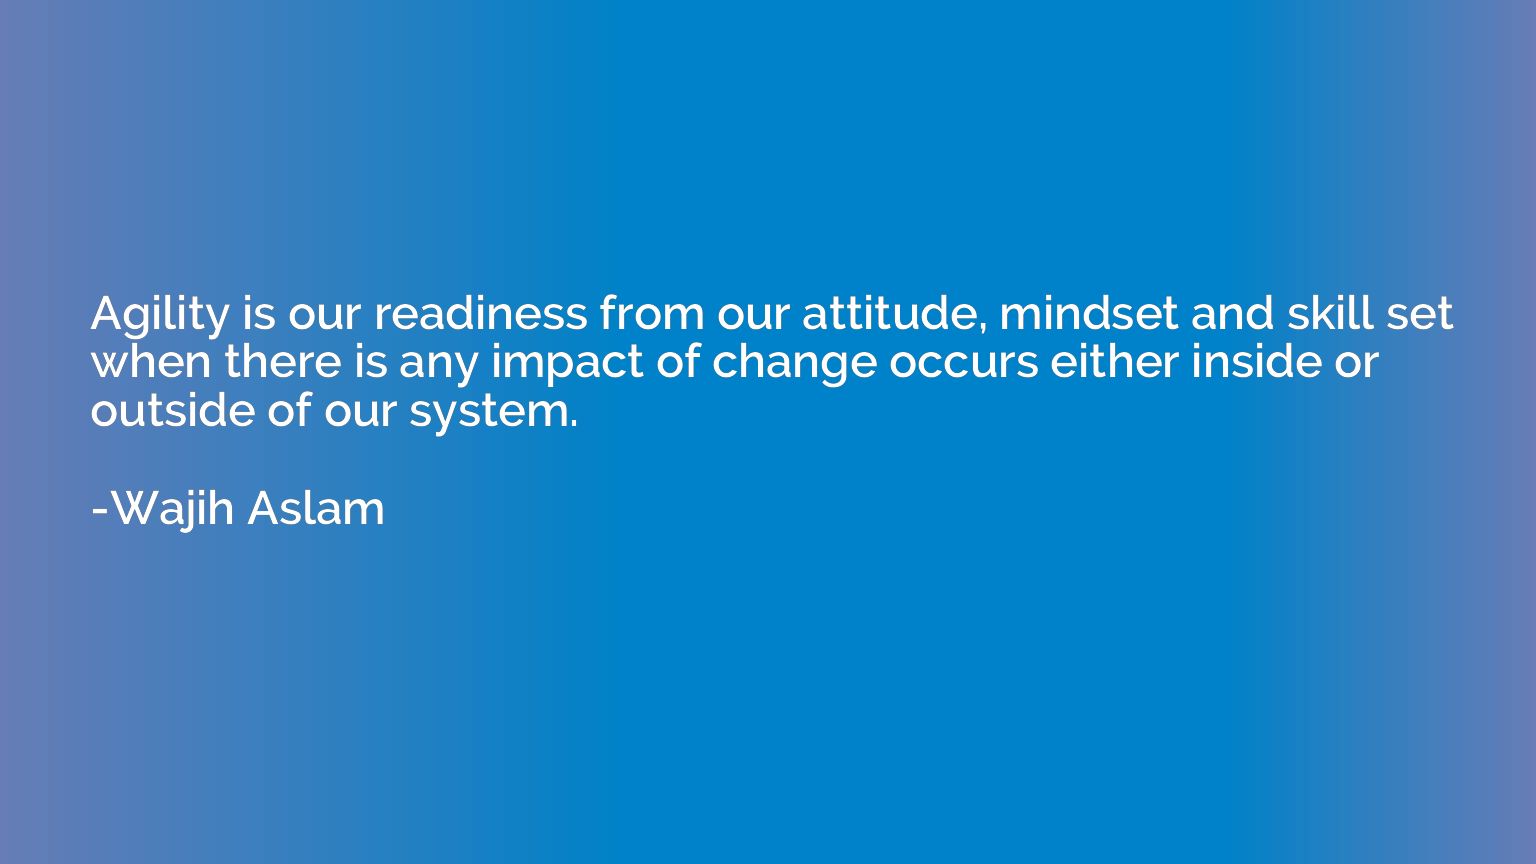 Agility is our readiness from our attitude, mindset and skil